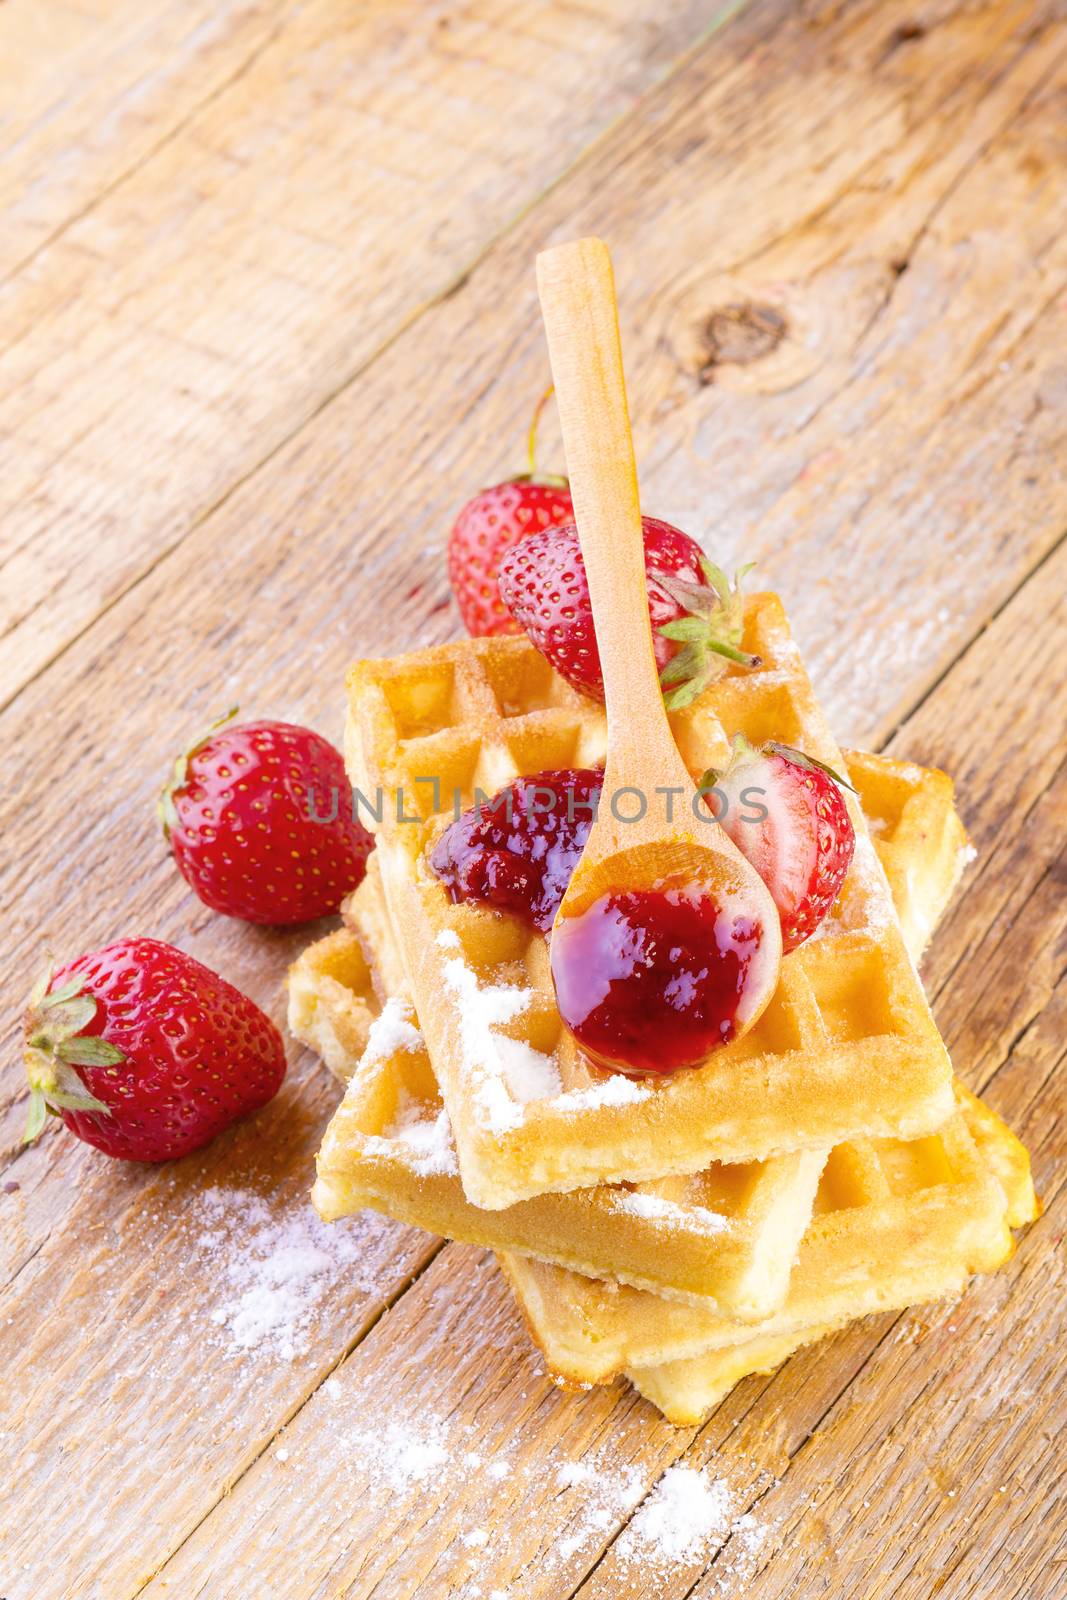 homemade waffles with strawberries maple syrup on wooden background